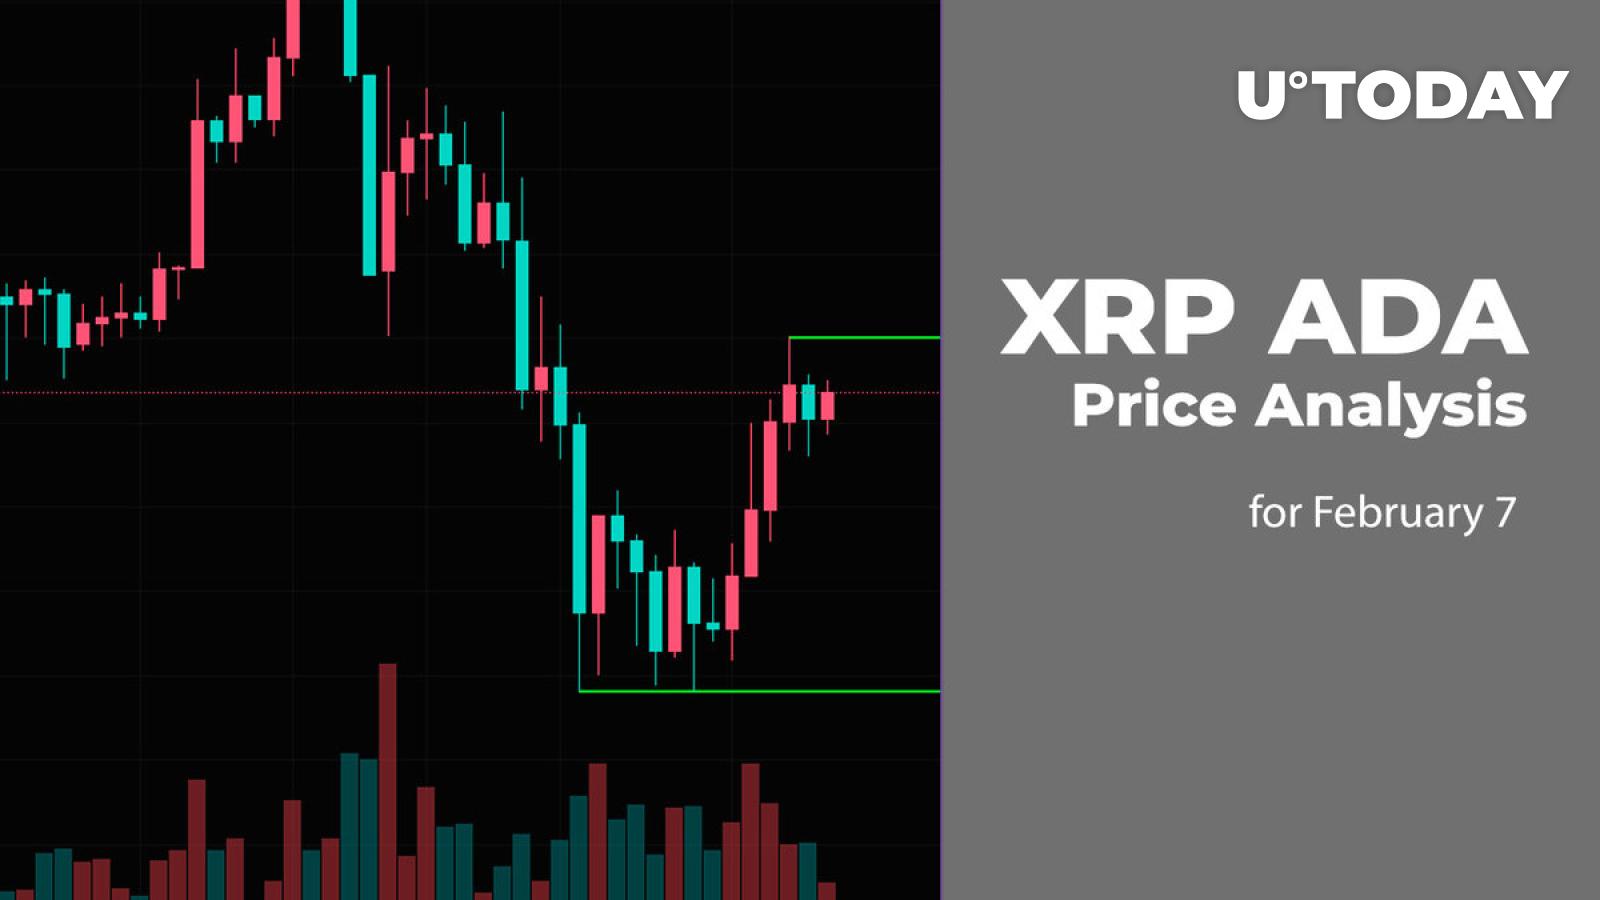 XRP and ADA Price Analysis for February 7